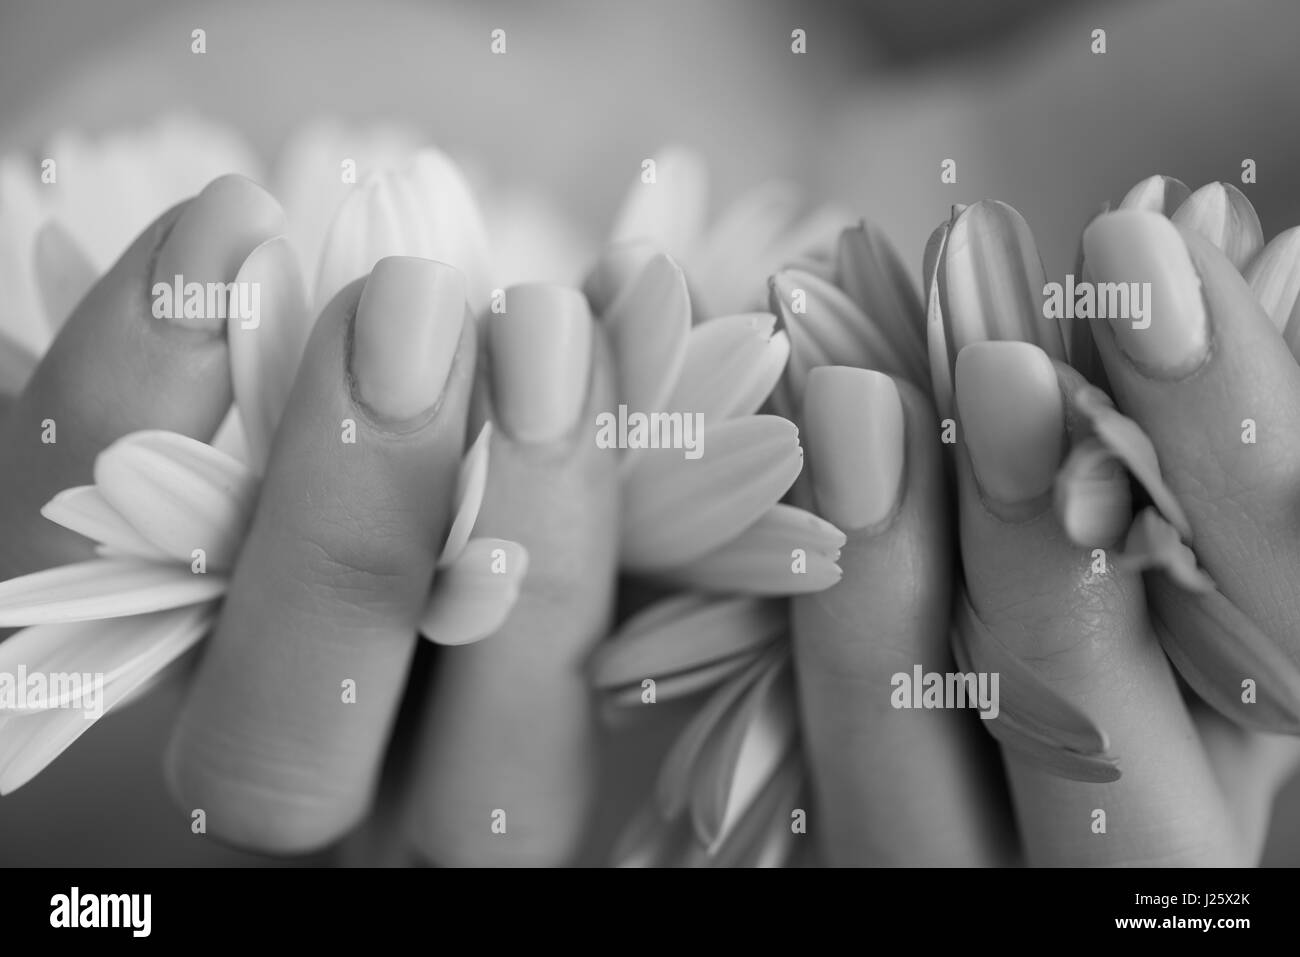 beauty delicate woman hands with manicure holding flower close up Stock Photo